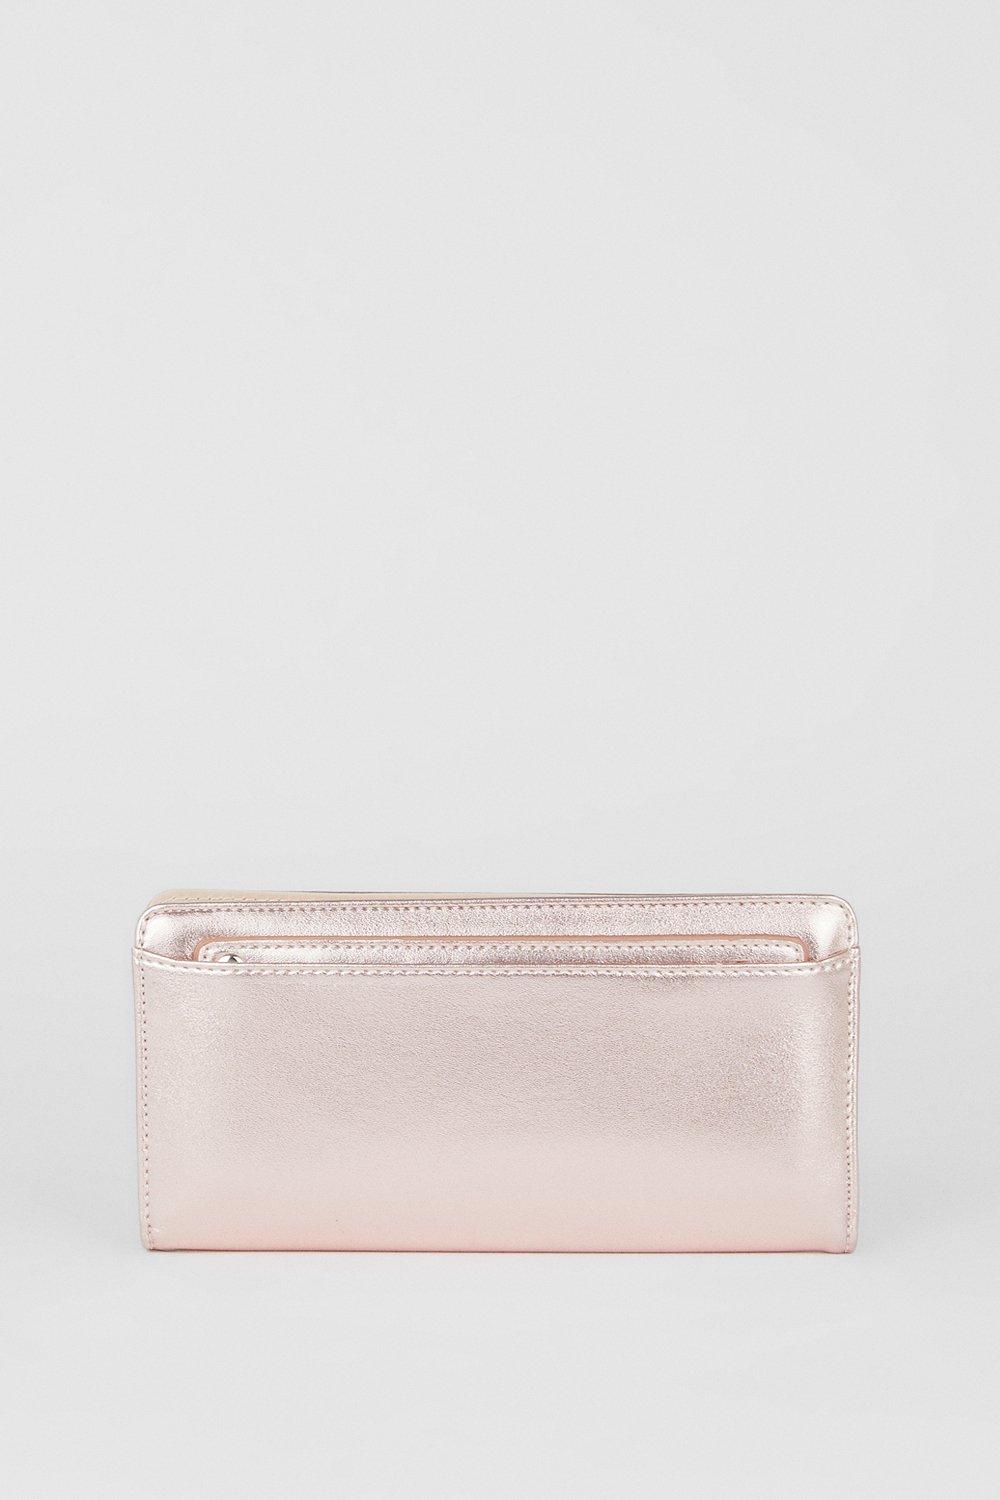 Women’s Faith: Maddy Metallic Purse Clutch With Wrist Strap - rose gold - ONE SIZE